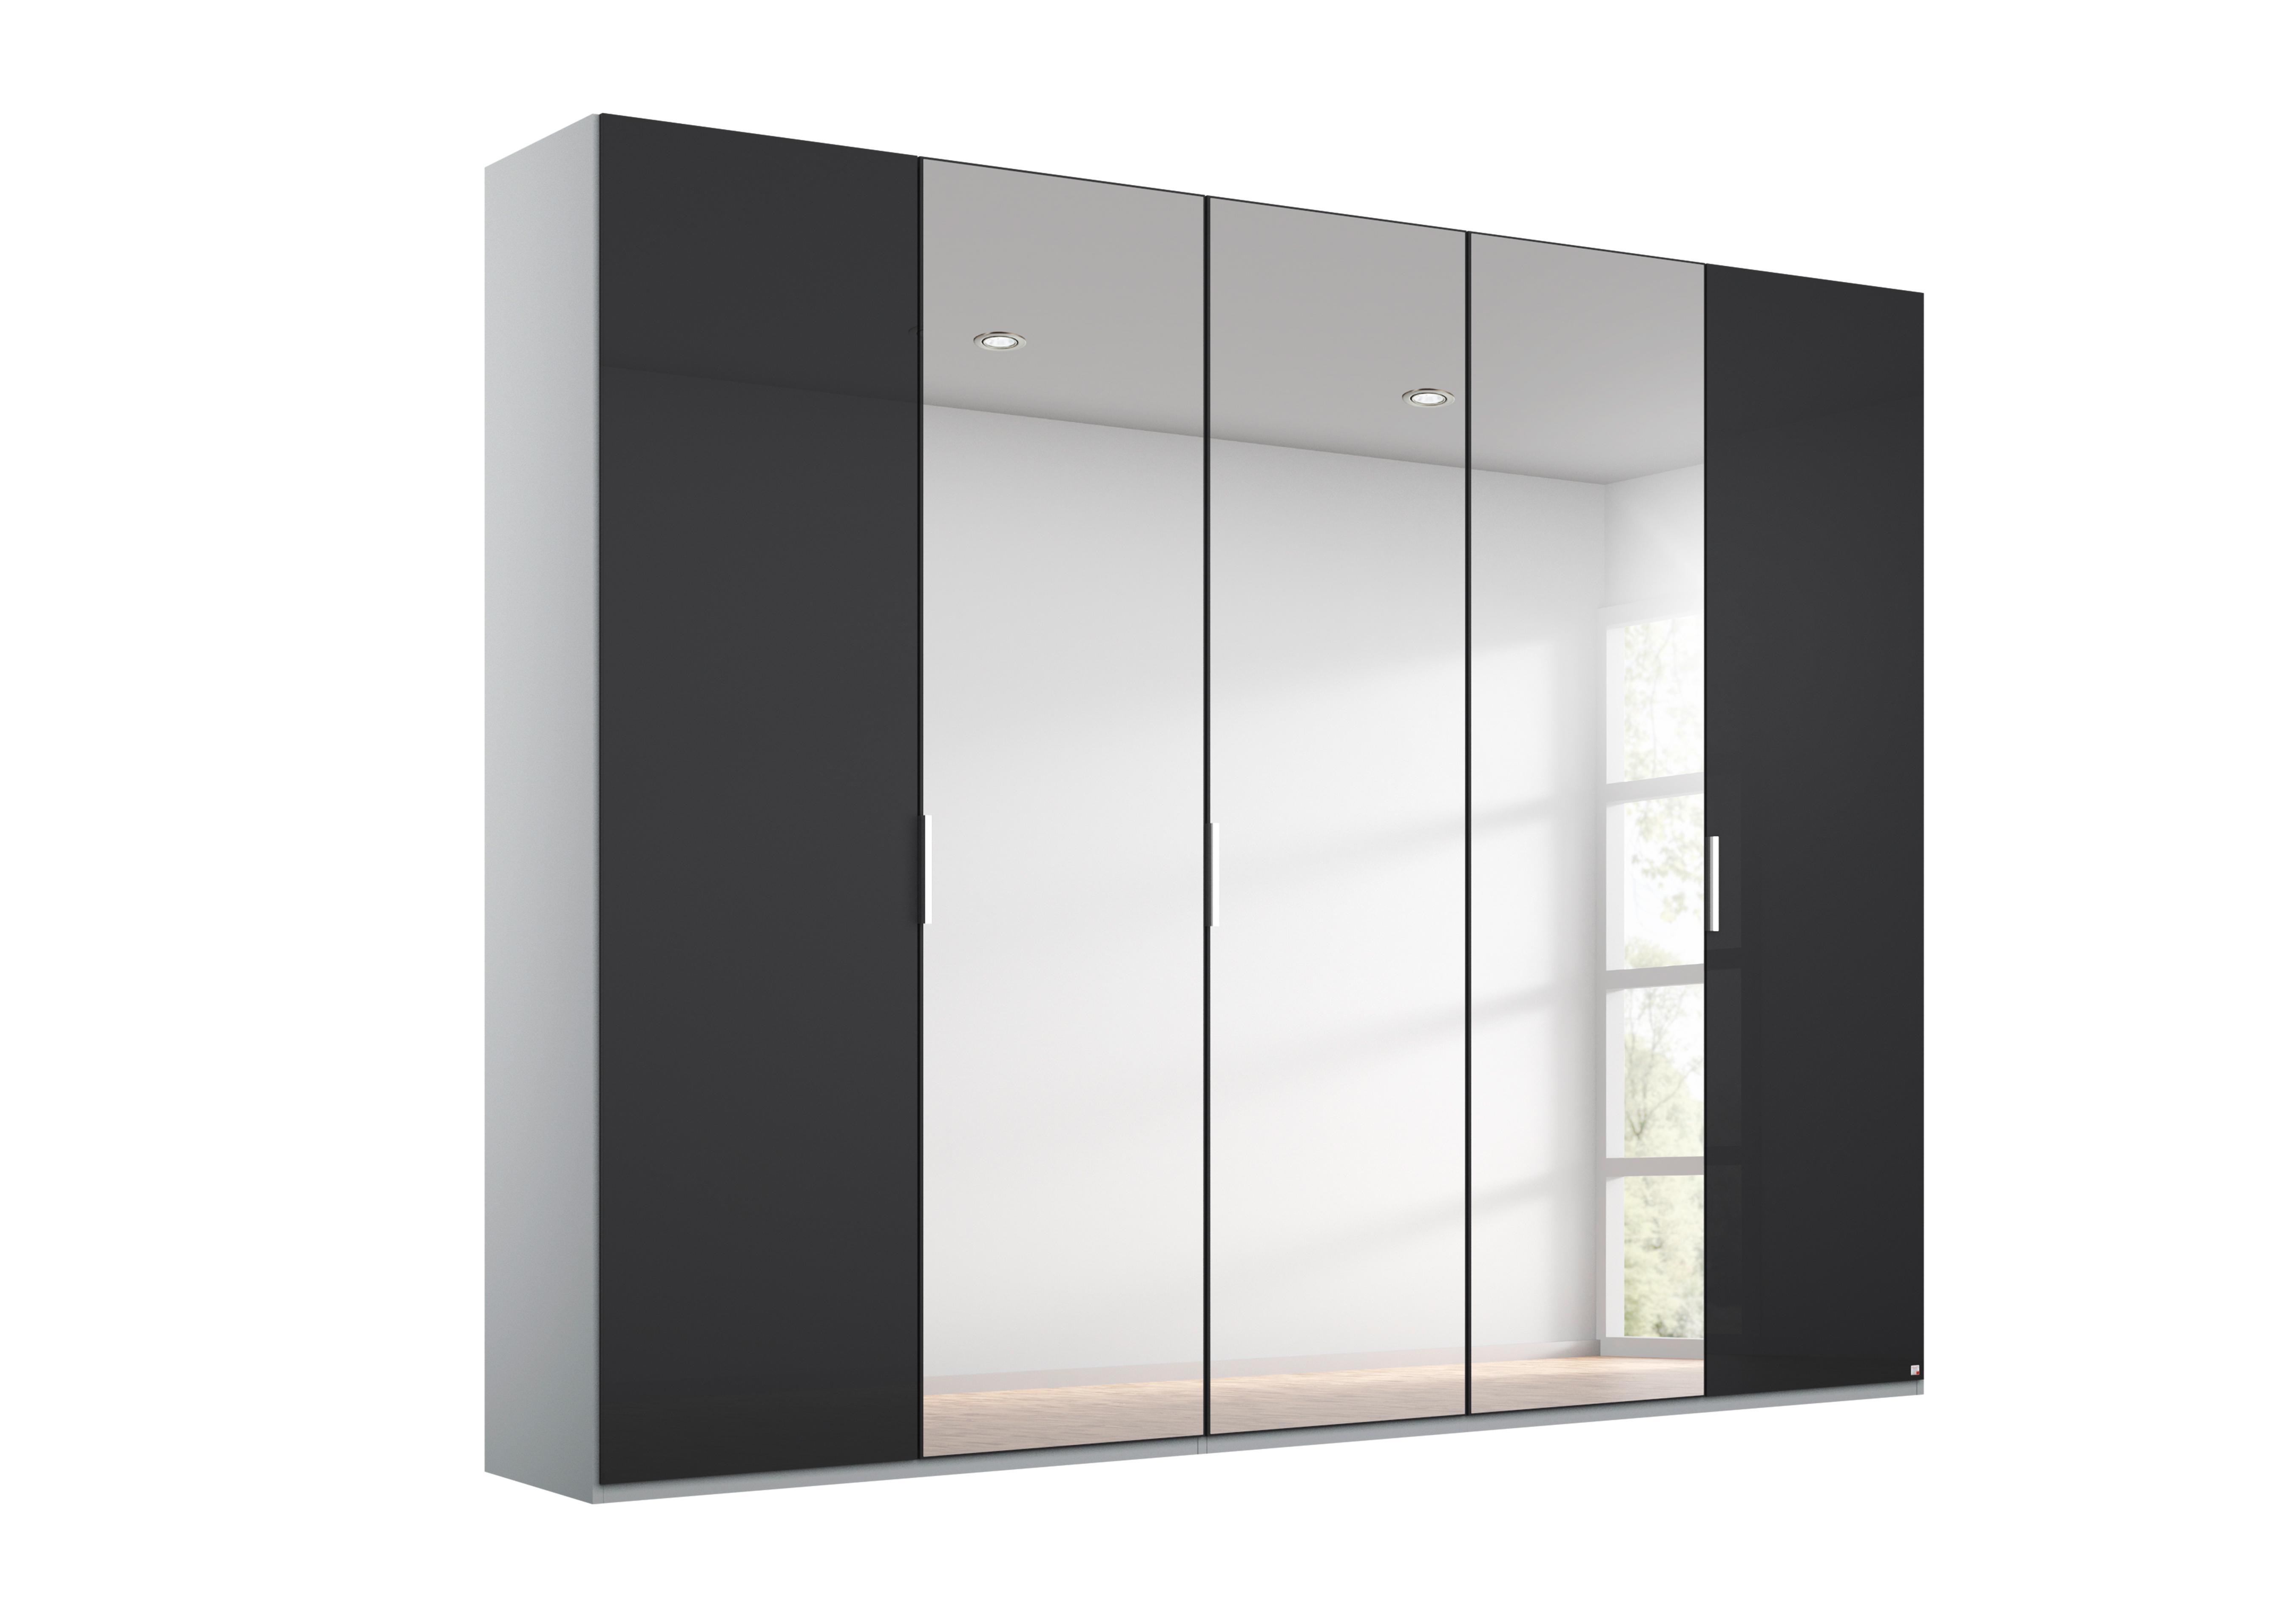 Formes Glass 5 Door Hinged Wardrobe with 3 Mirrors in A144b Silk Grey Basalt Front on Furniture Village